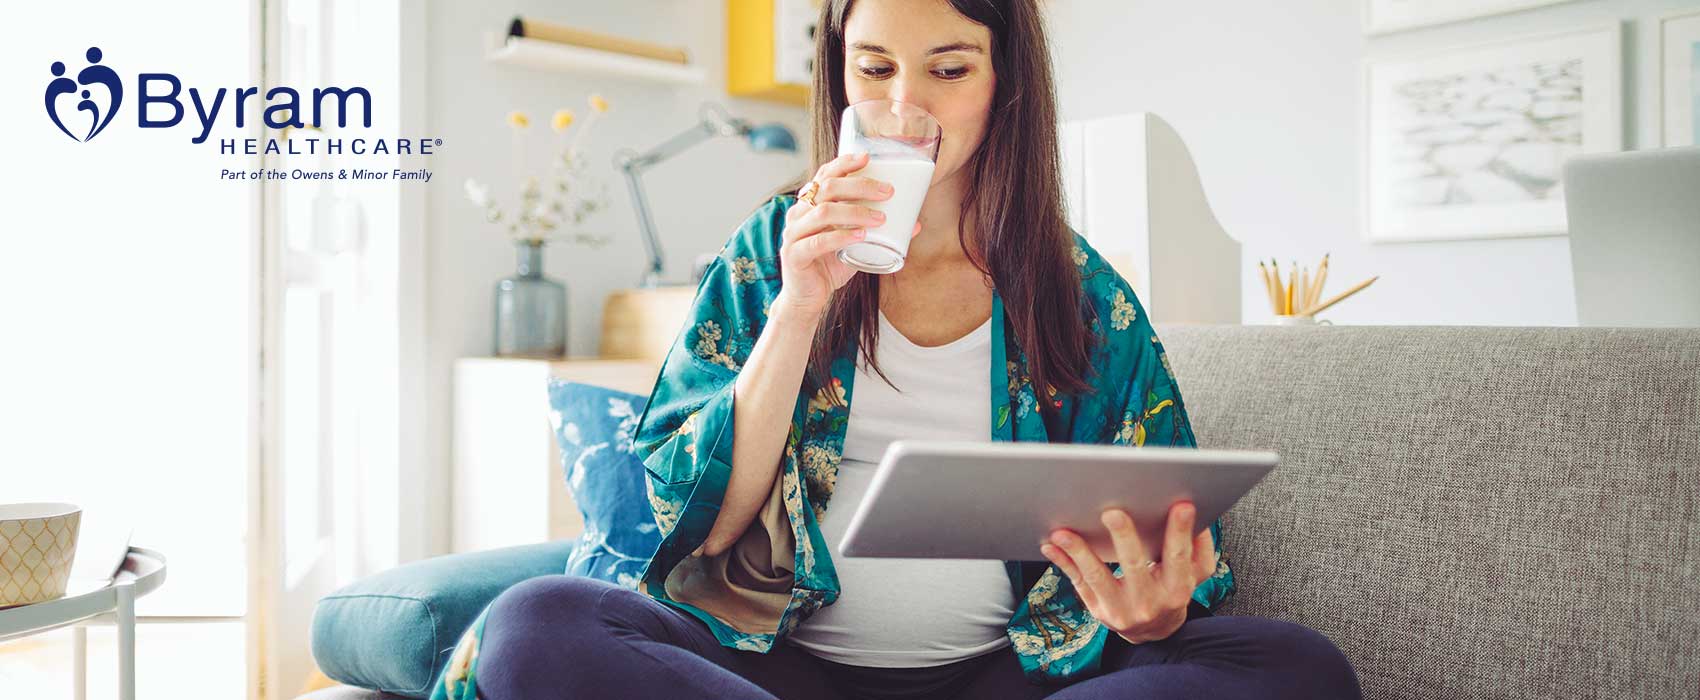 Woman drinking milk and looking at her tablet.